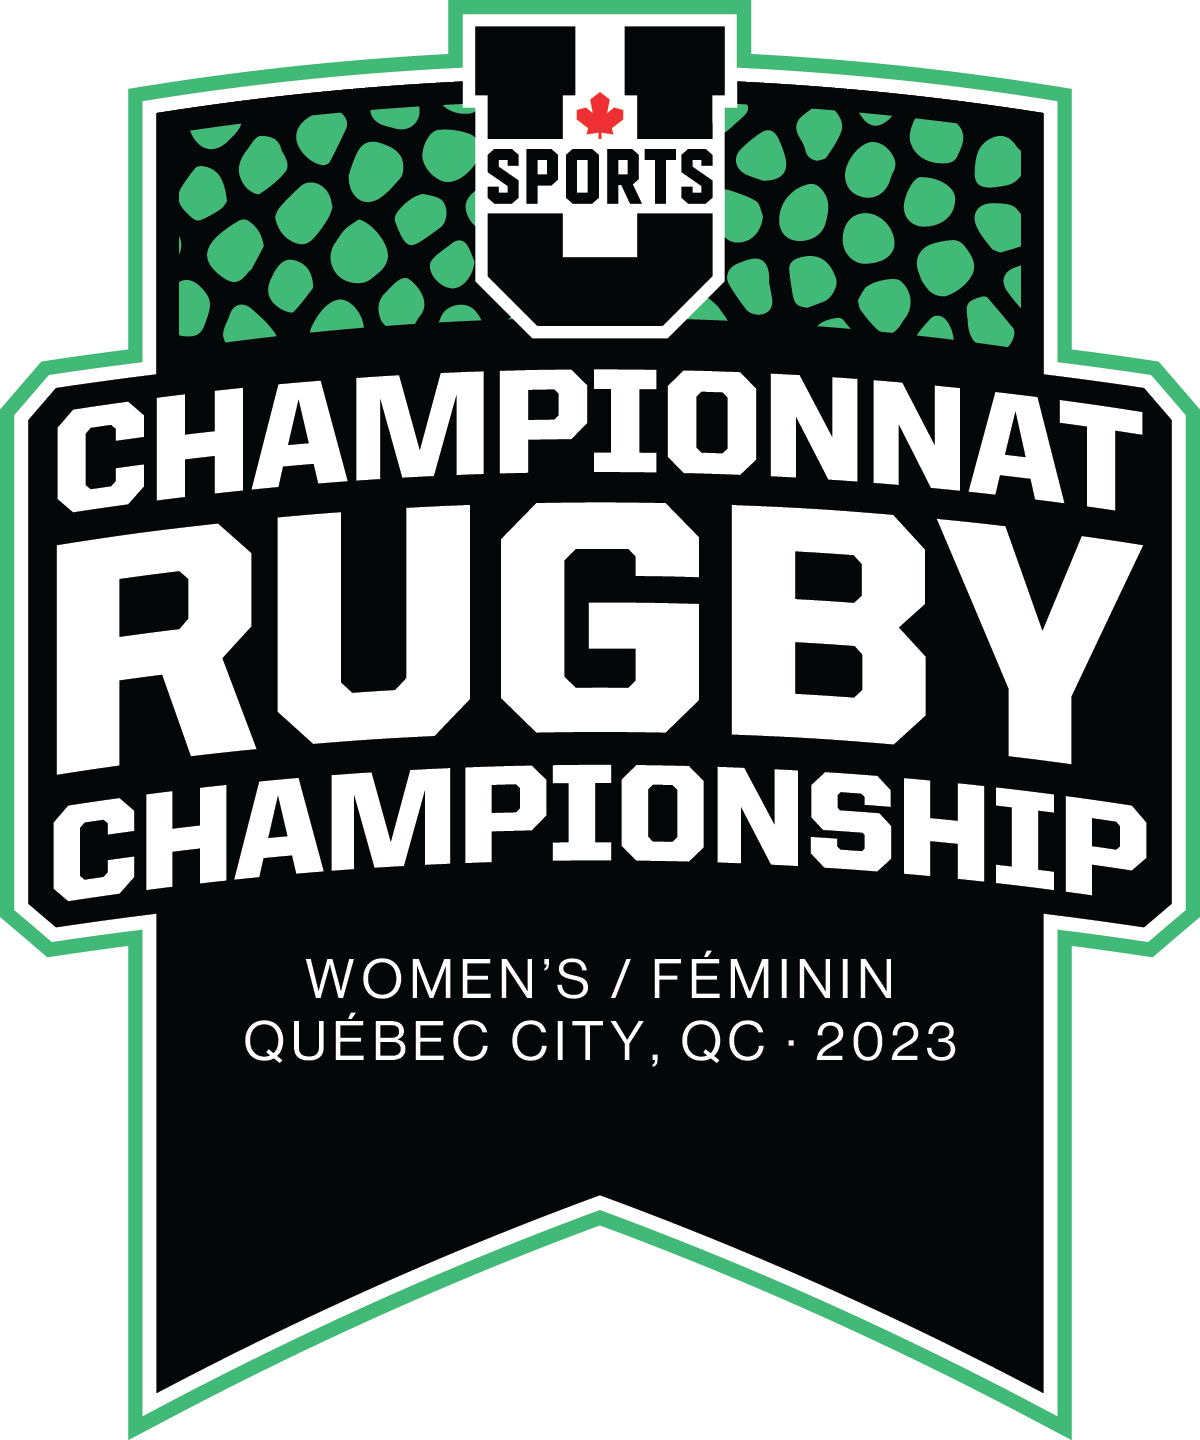 USports_Champ2324_Rugby_Primary_CMYK_BL.png (111 KB)